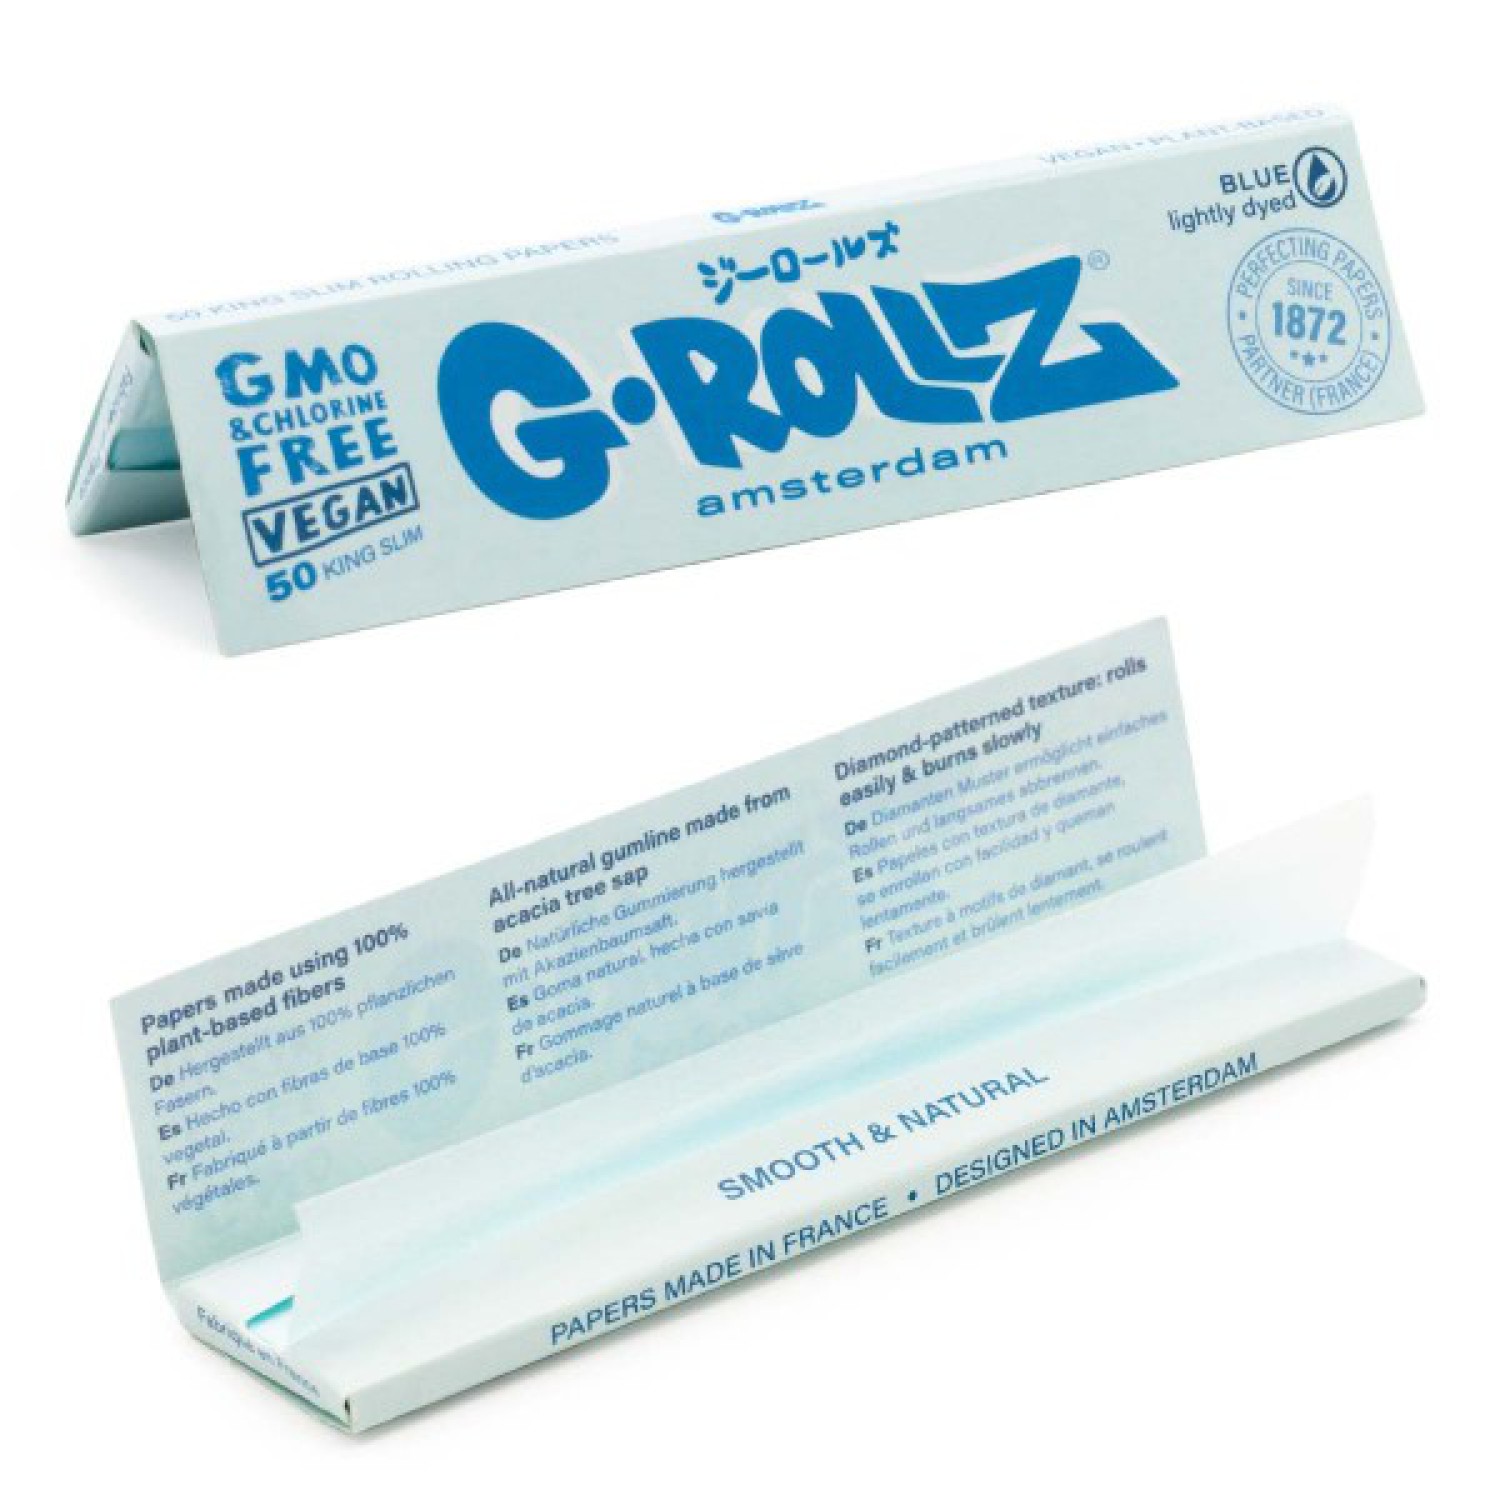 G-ROLLZ | Lightly Dyed Blue - 50 KS Papers (50 Booklets Display)